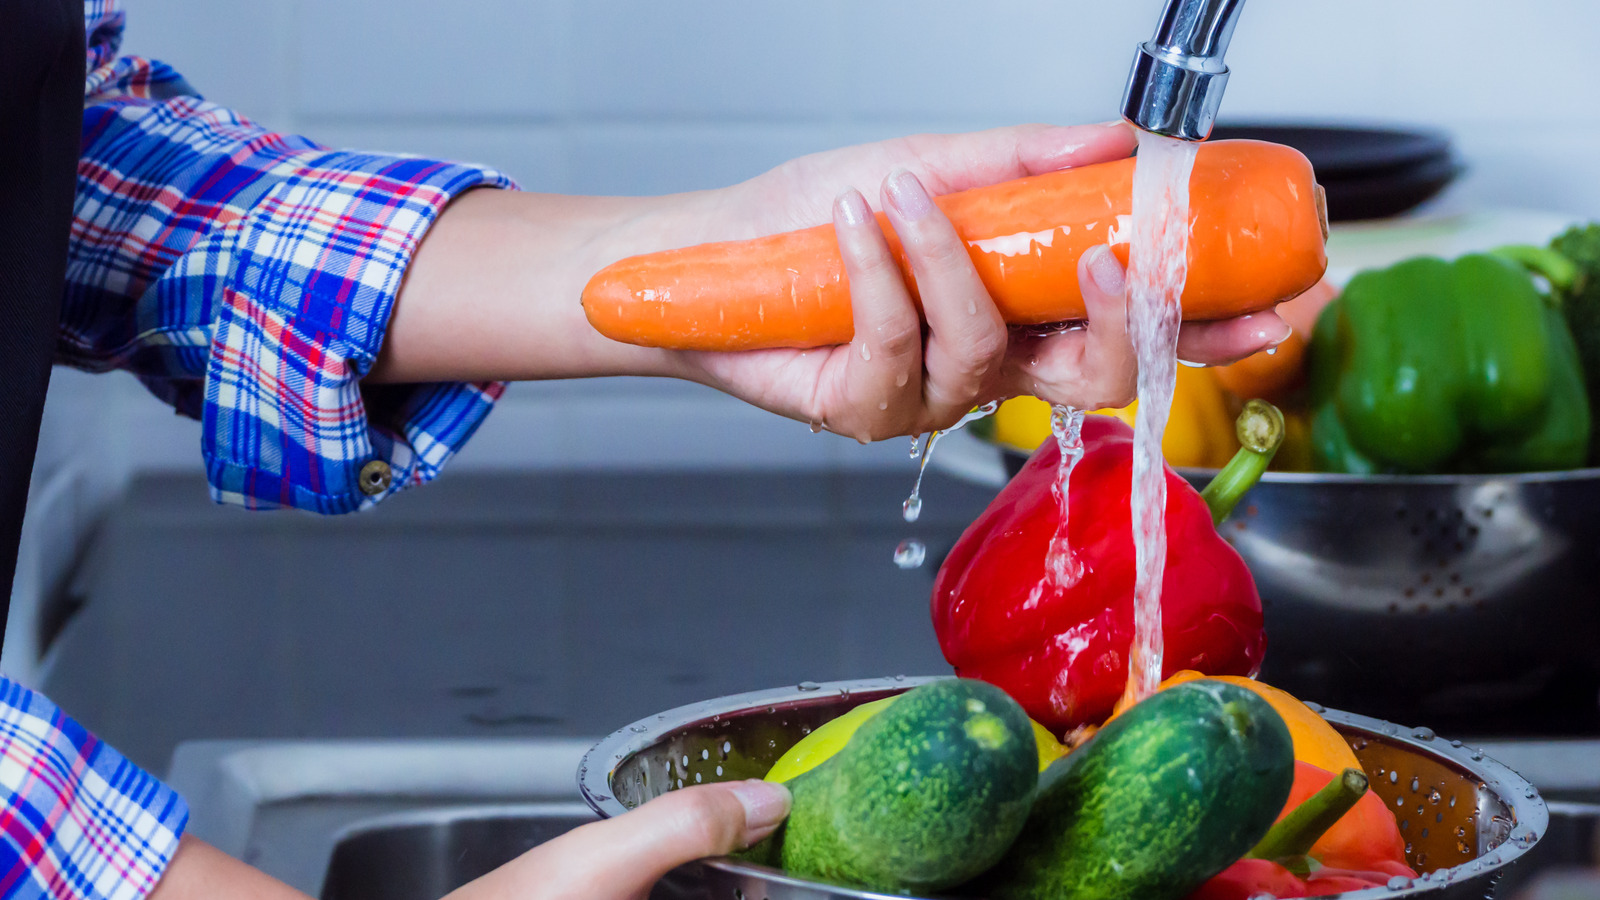 Viral video advises washing fruit and vegetables with soap. Here's why  that's a bad idea.